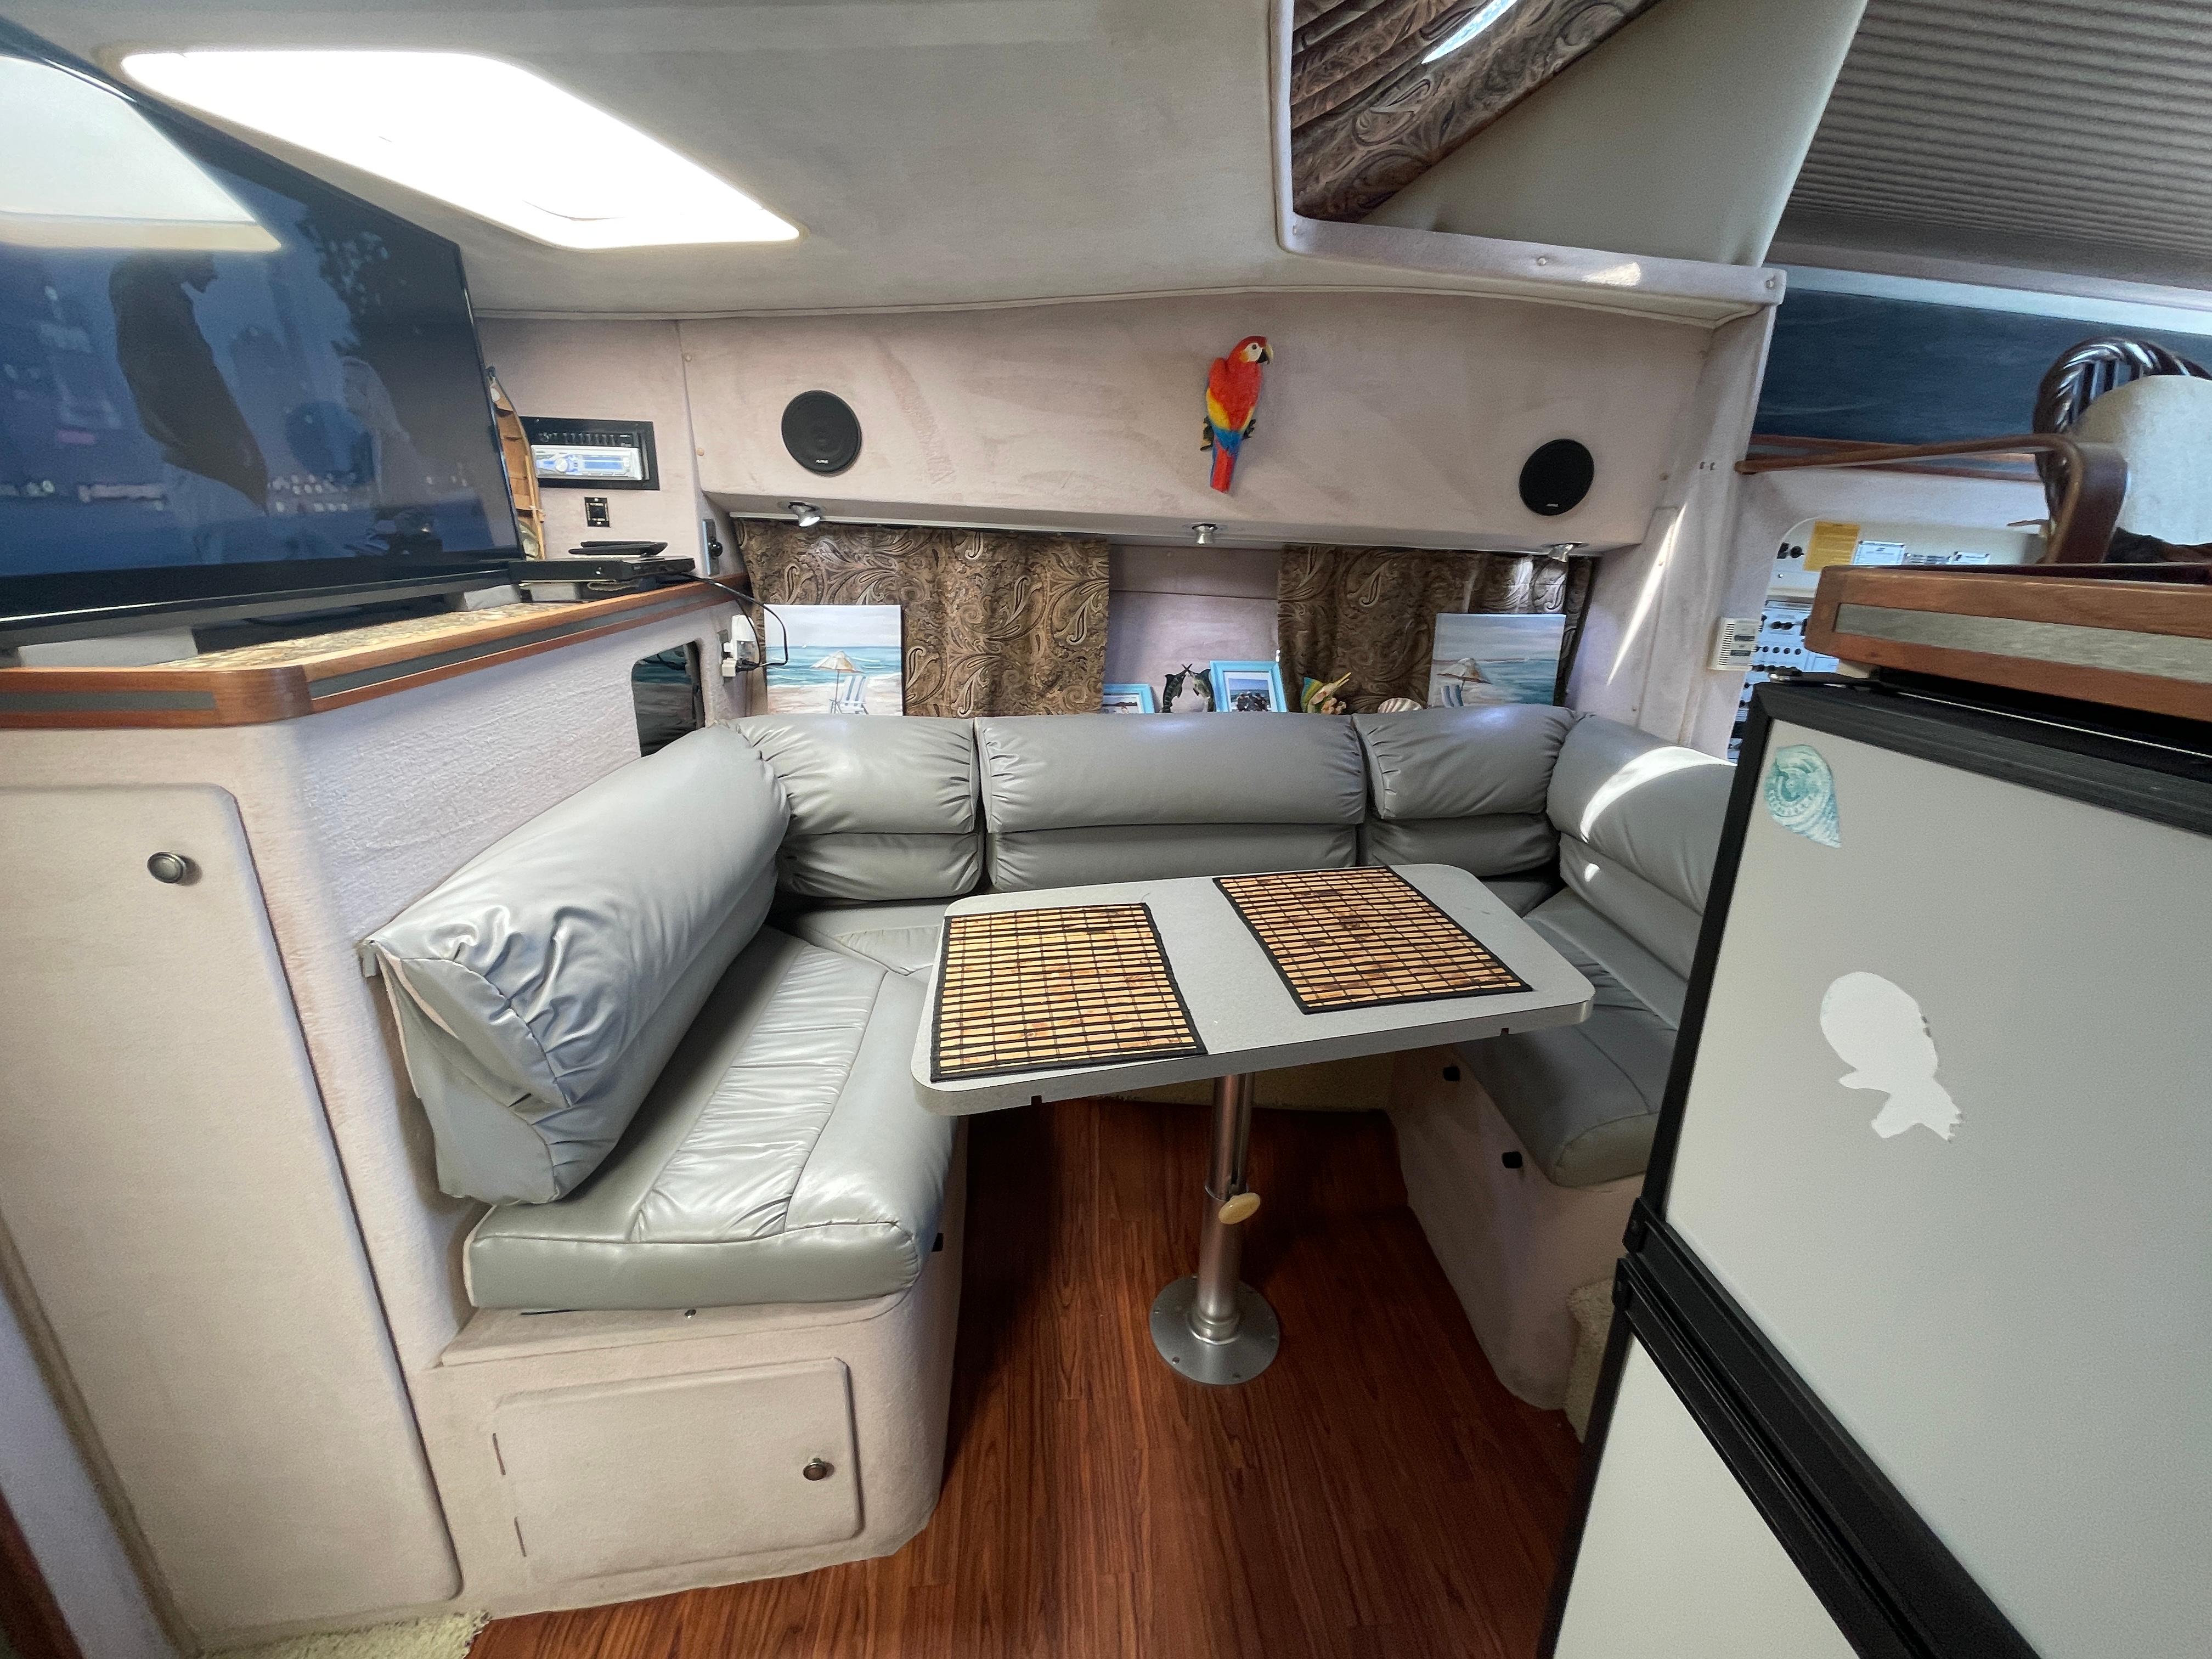 Dinette Which Converts to Berth